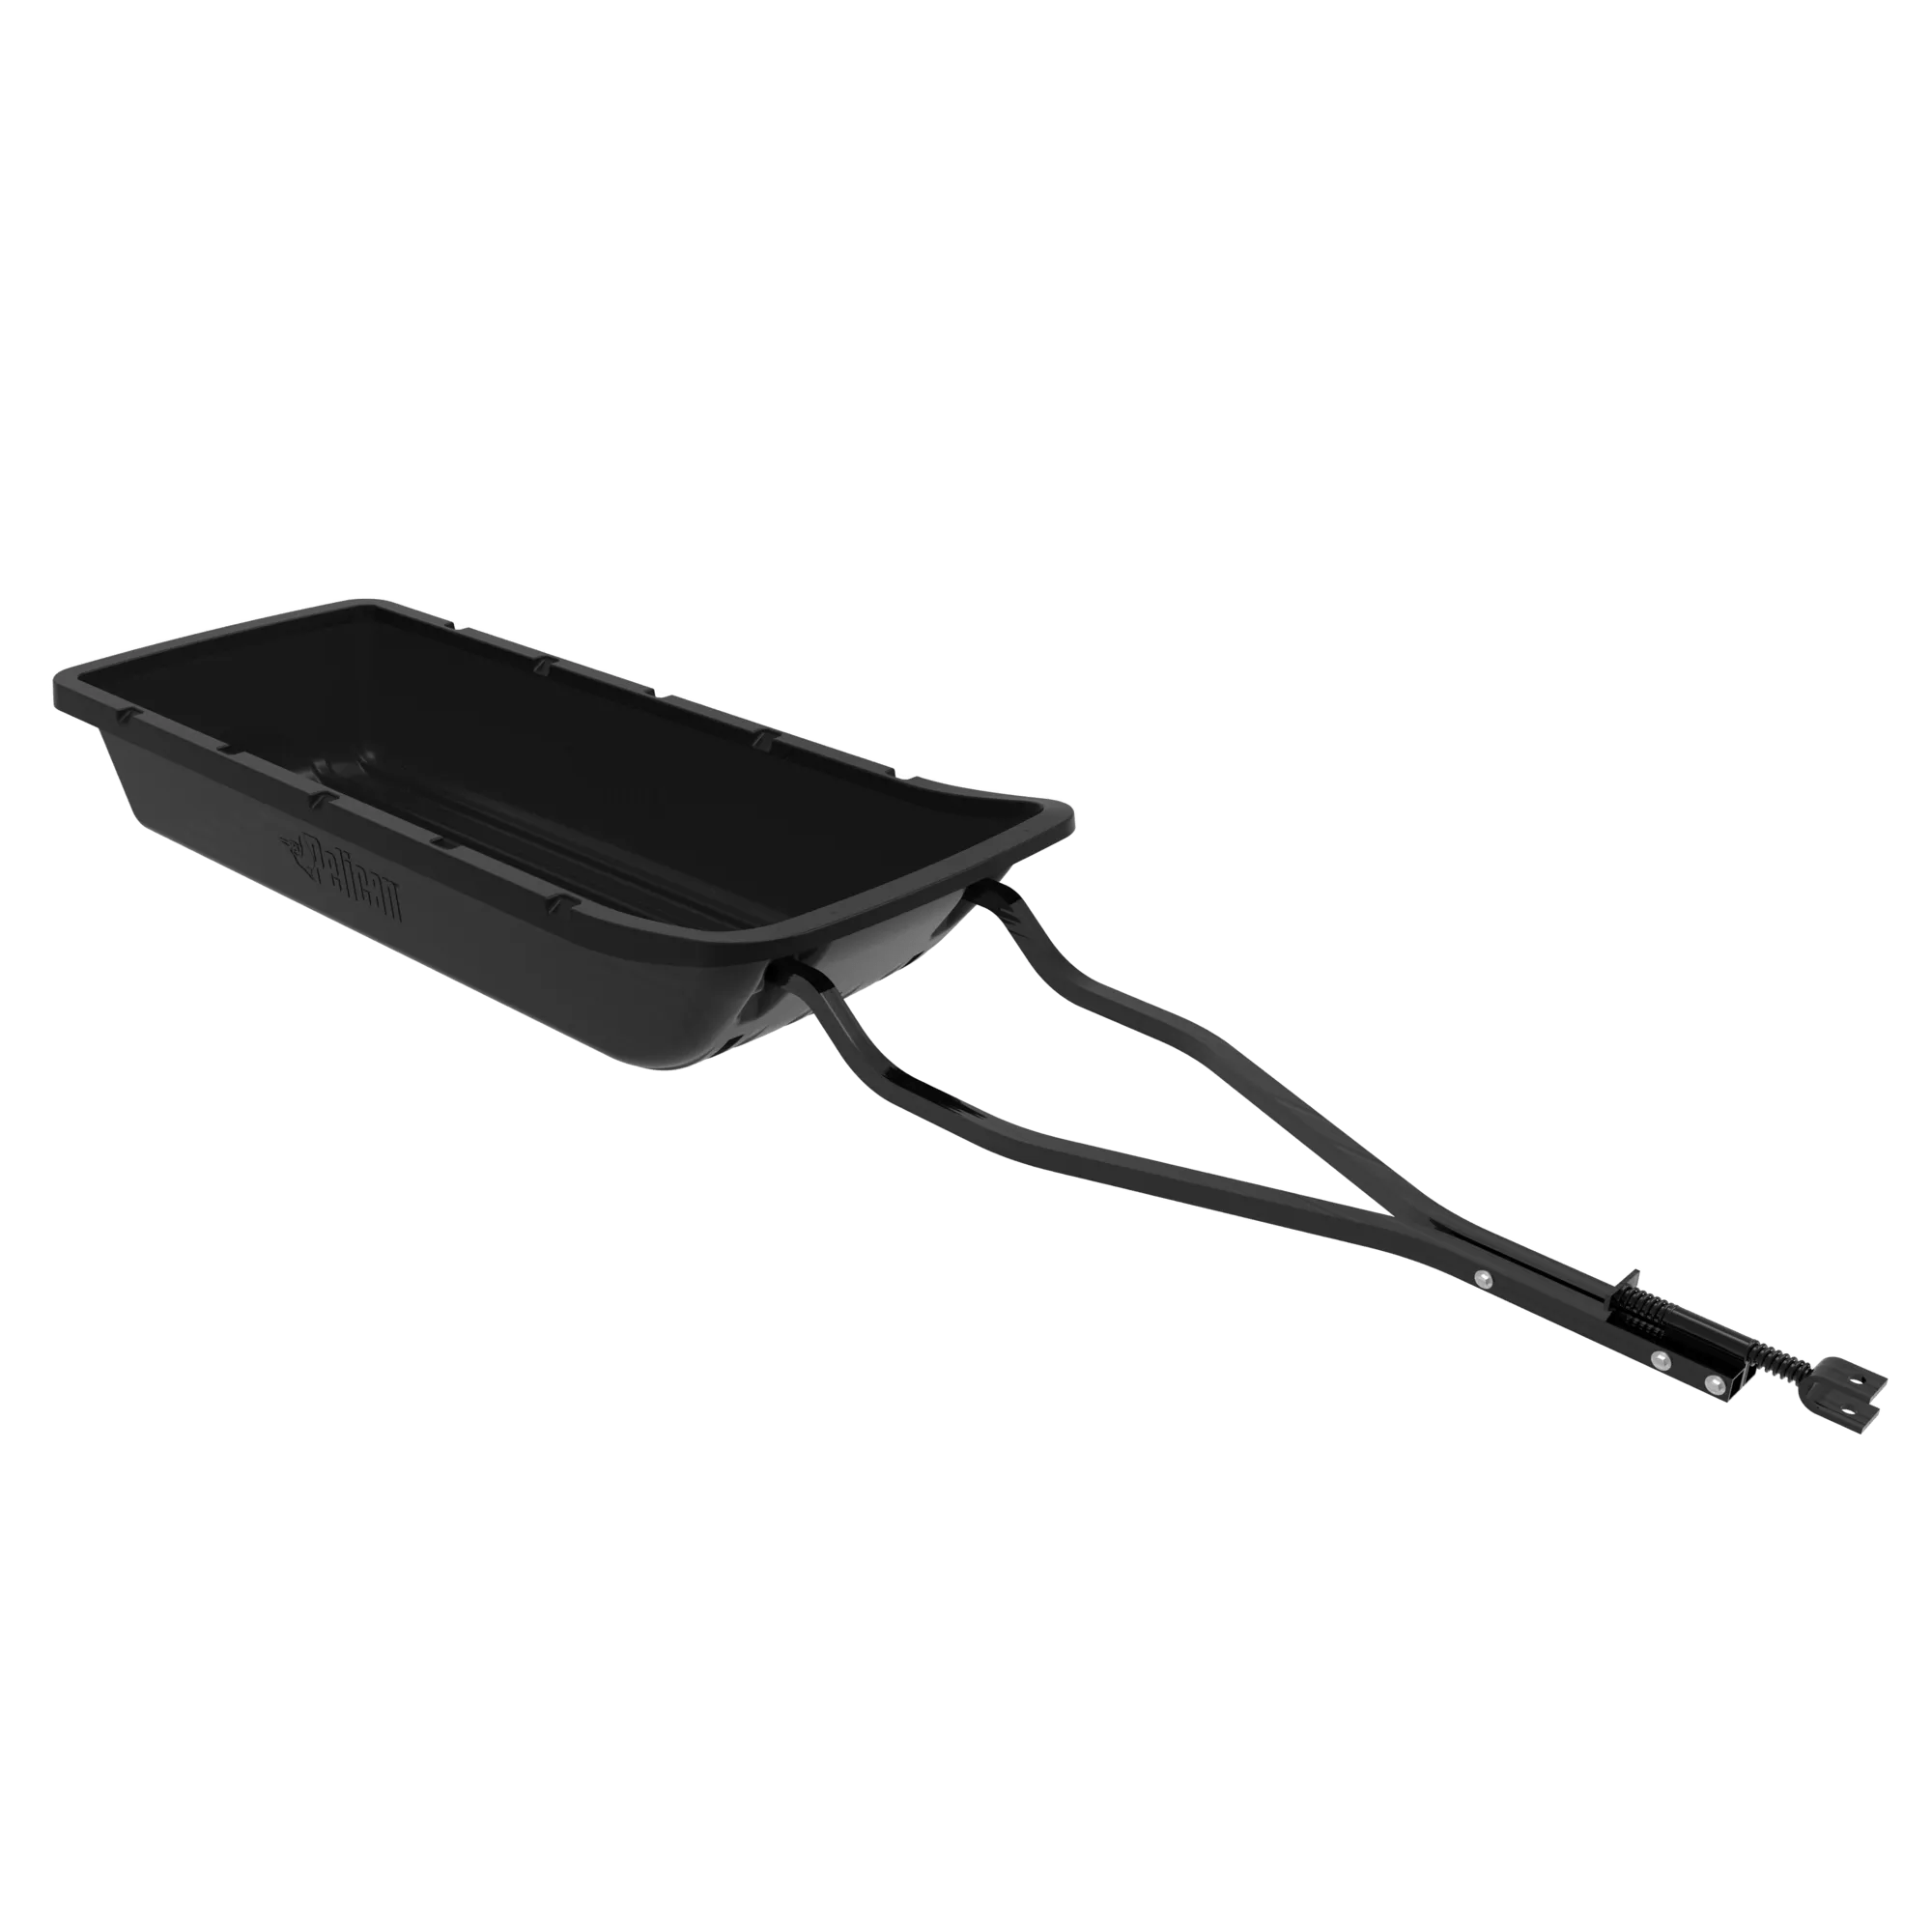 PELICAN - Trek 60 Utility Sled with Runners & Tow Hitch - Black - LDT60PE00 - ISO 